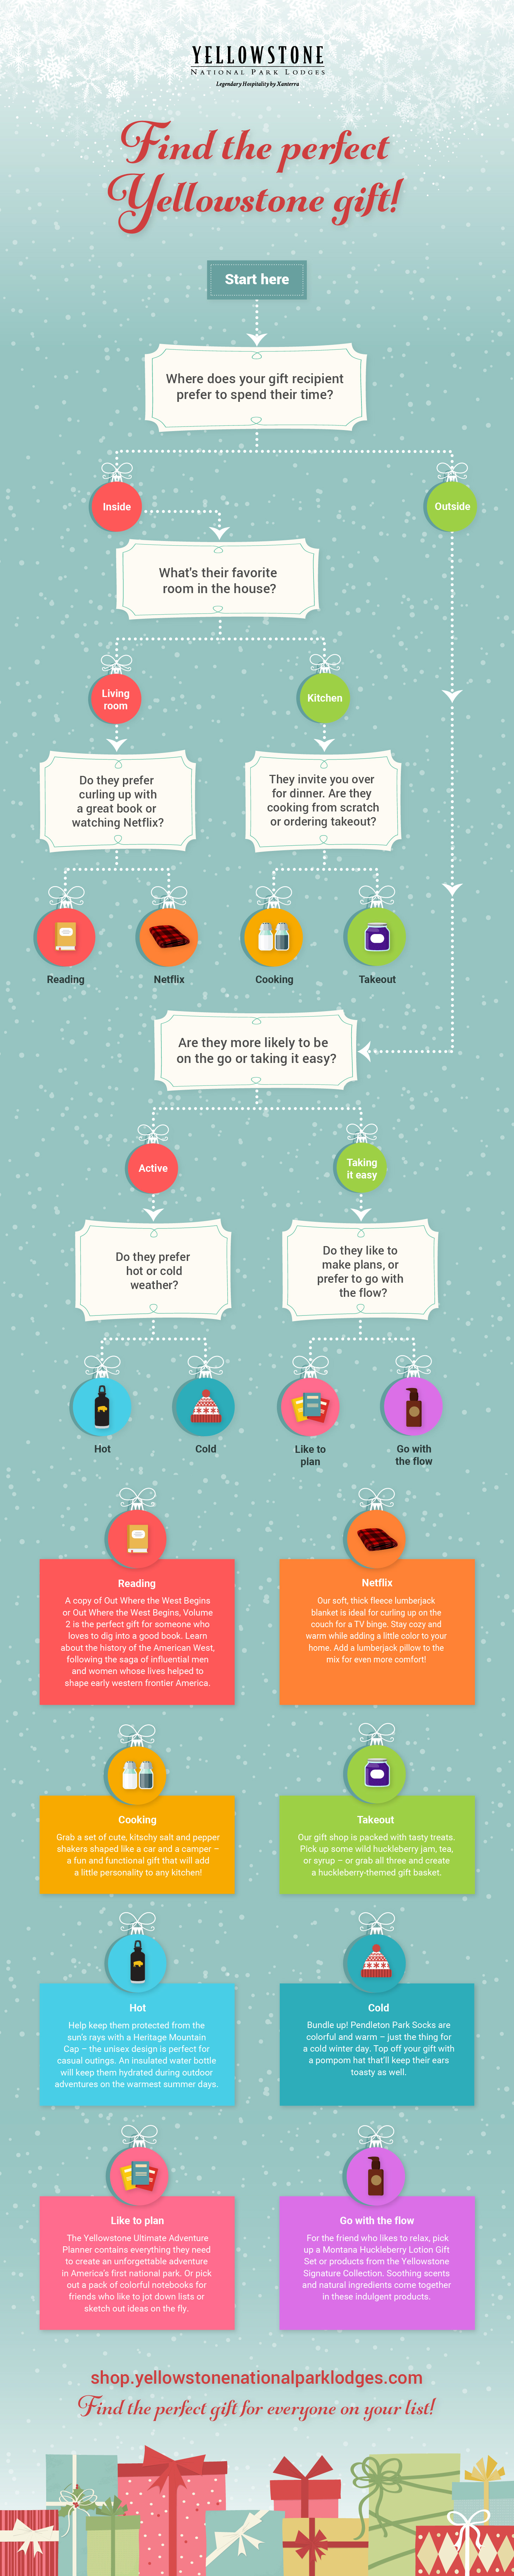 Holiday gift guide flow chart for Yellowstone National Park